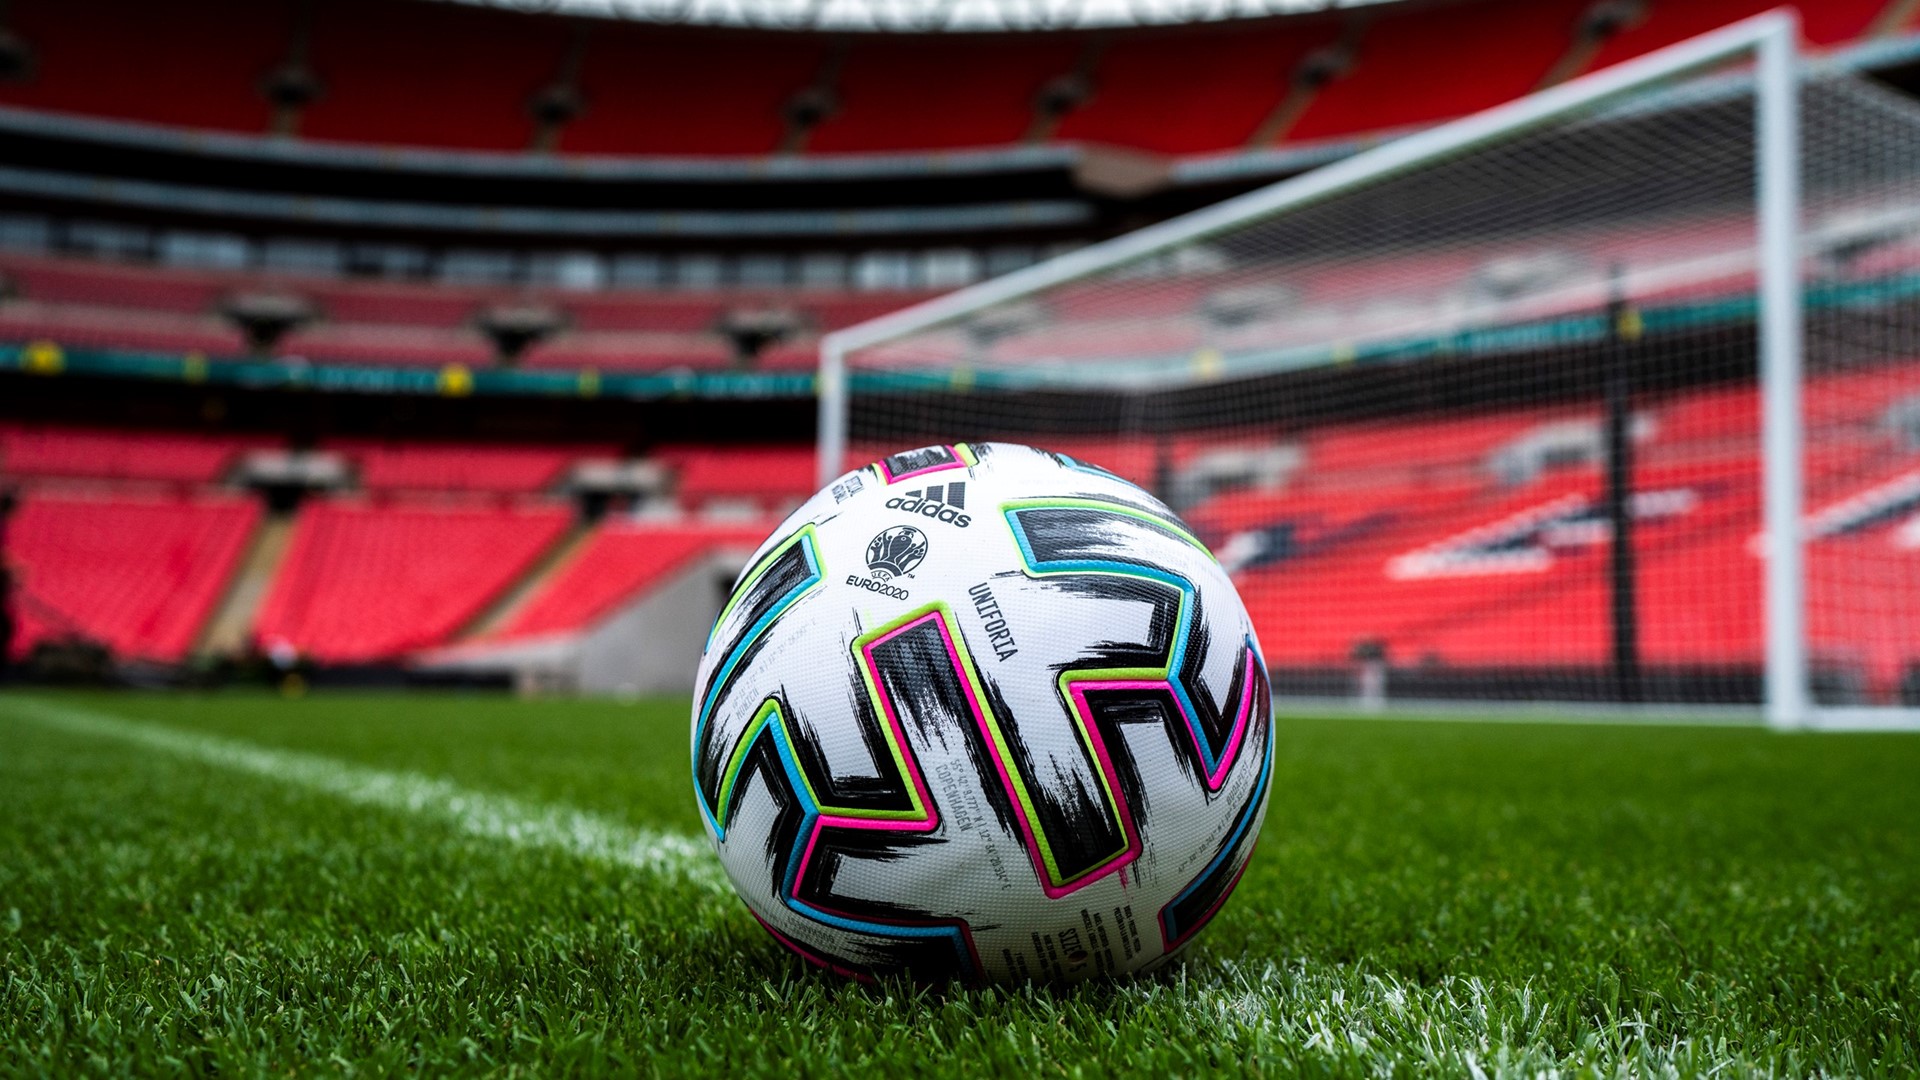 adidas celebrates unity with the unveil of 'Uniforia' - the Official Match  Ball for UEFA EURO2020TM